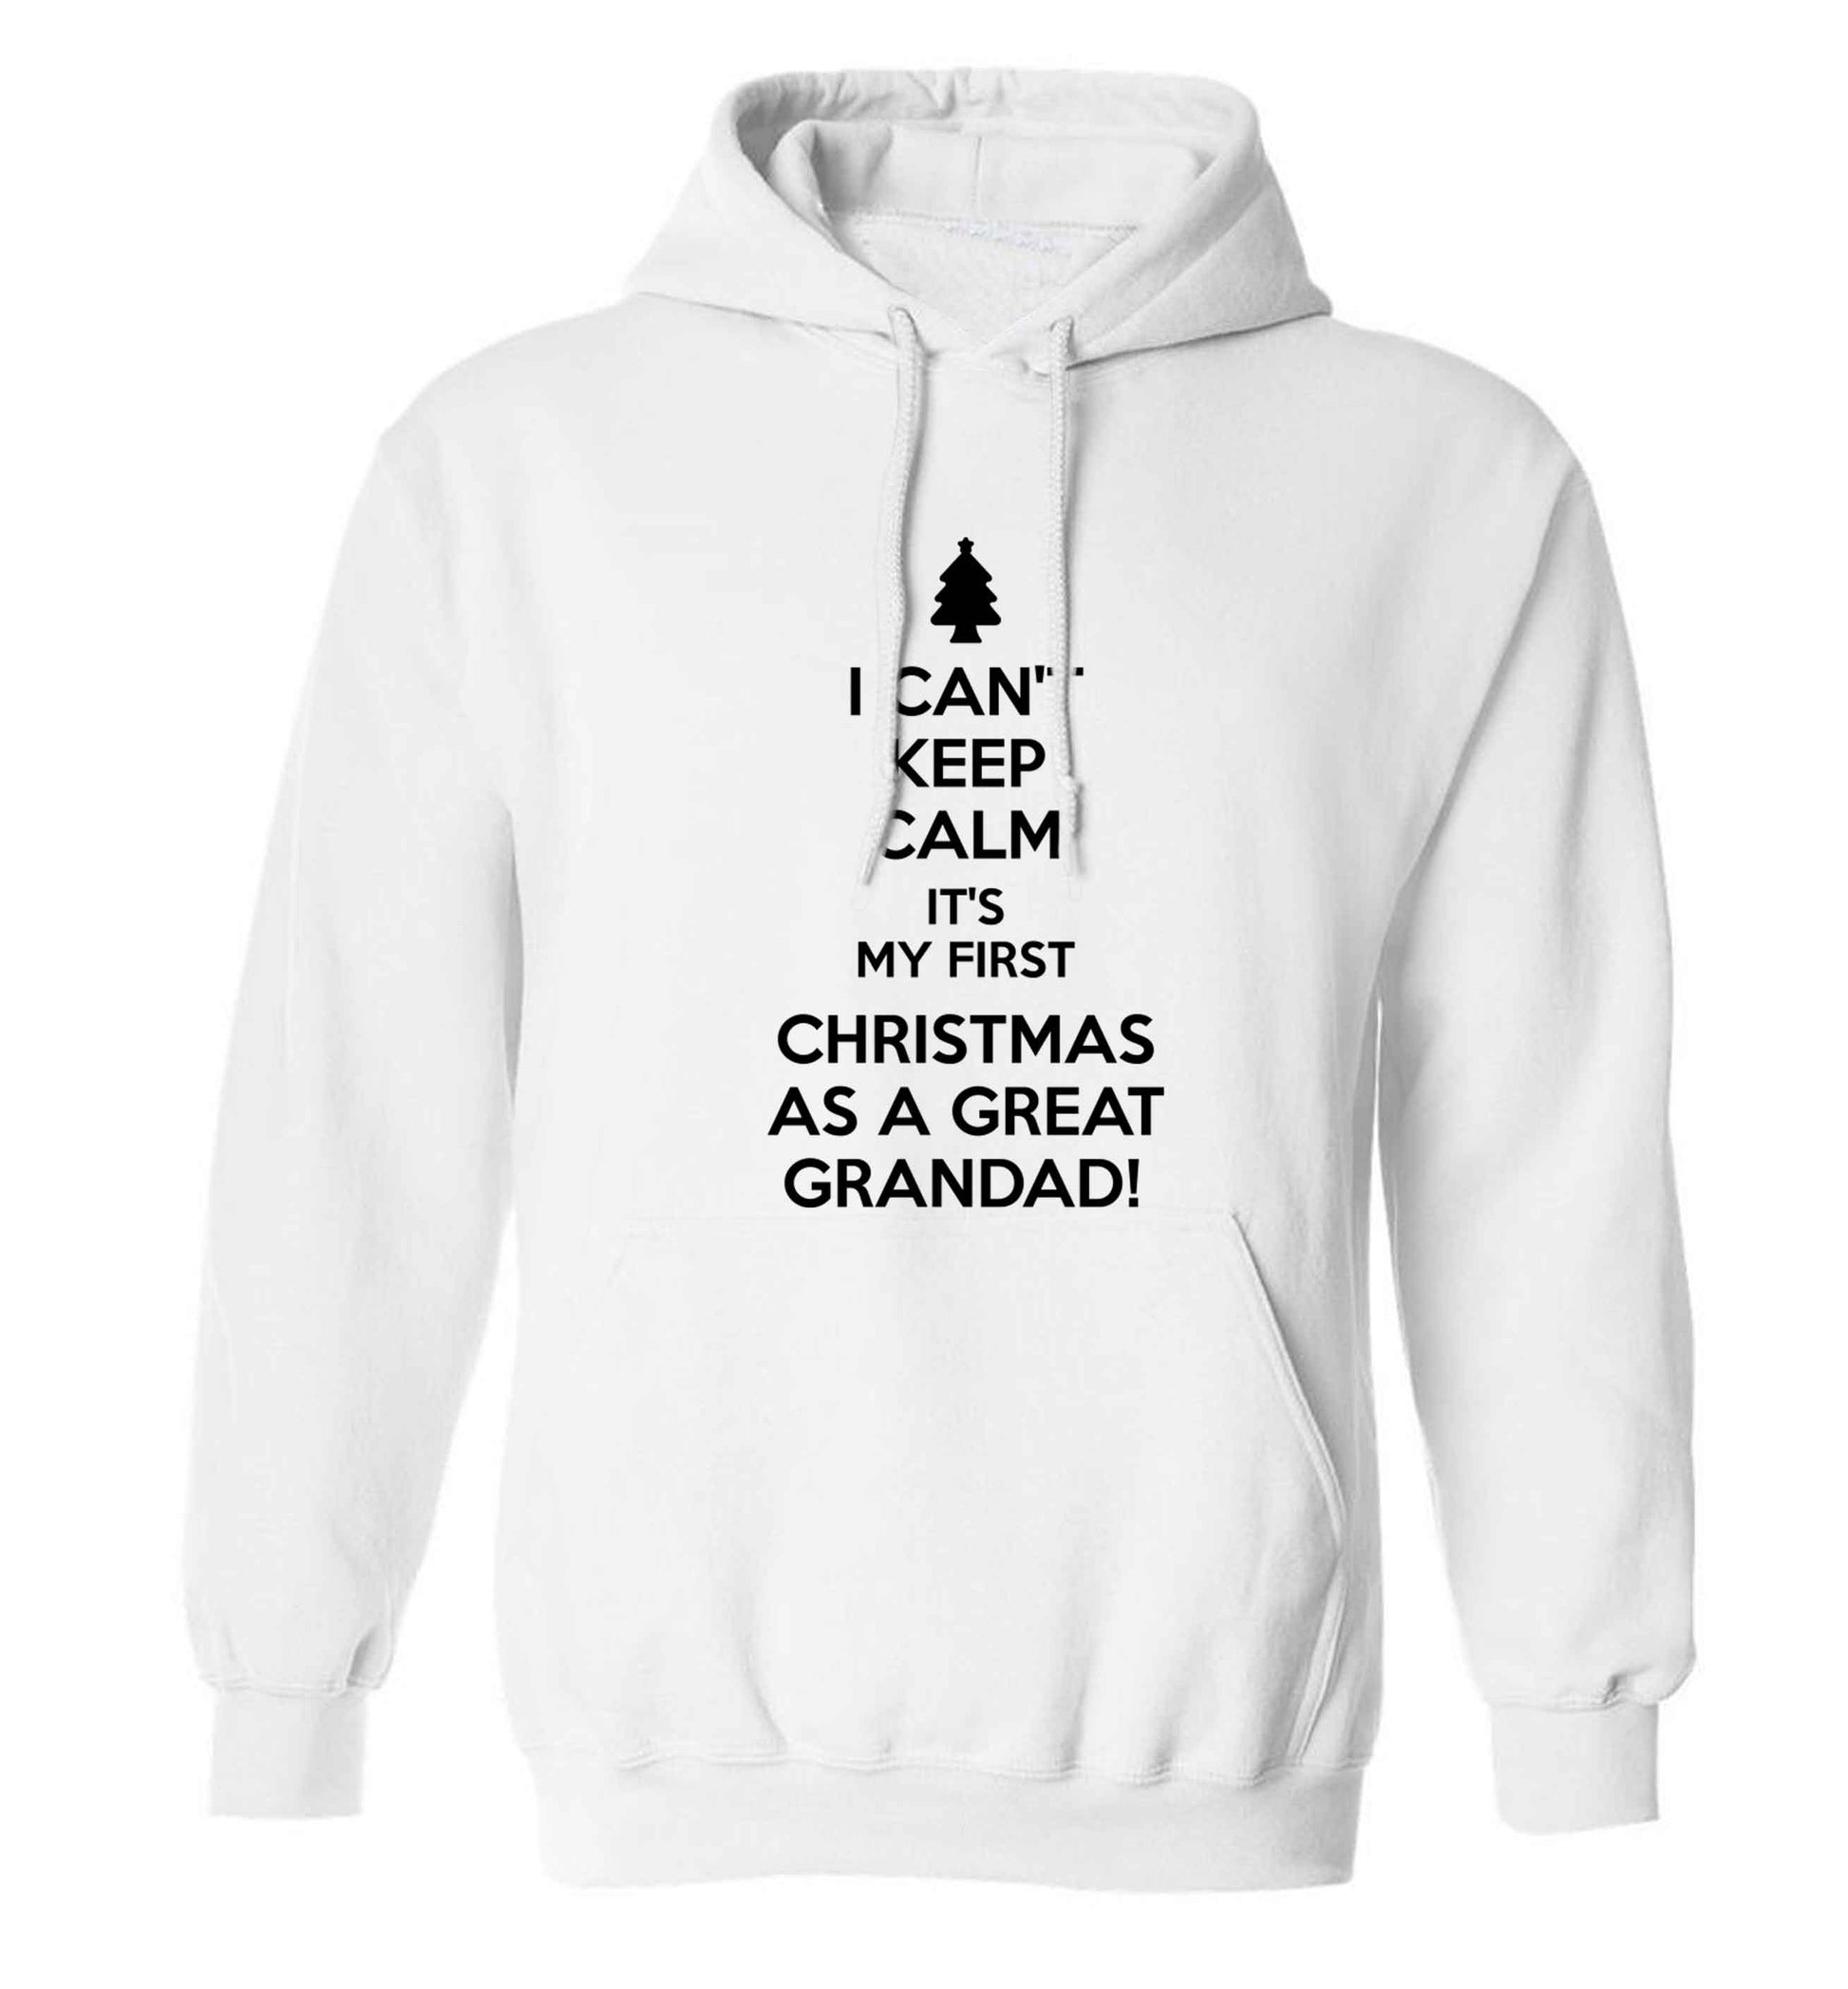 I can't keep calm it's my first Christmas as a great grandad! adults unisex white hoodie 2XL